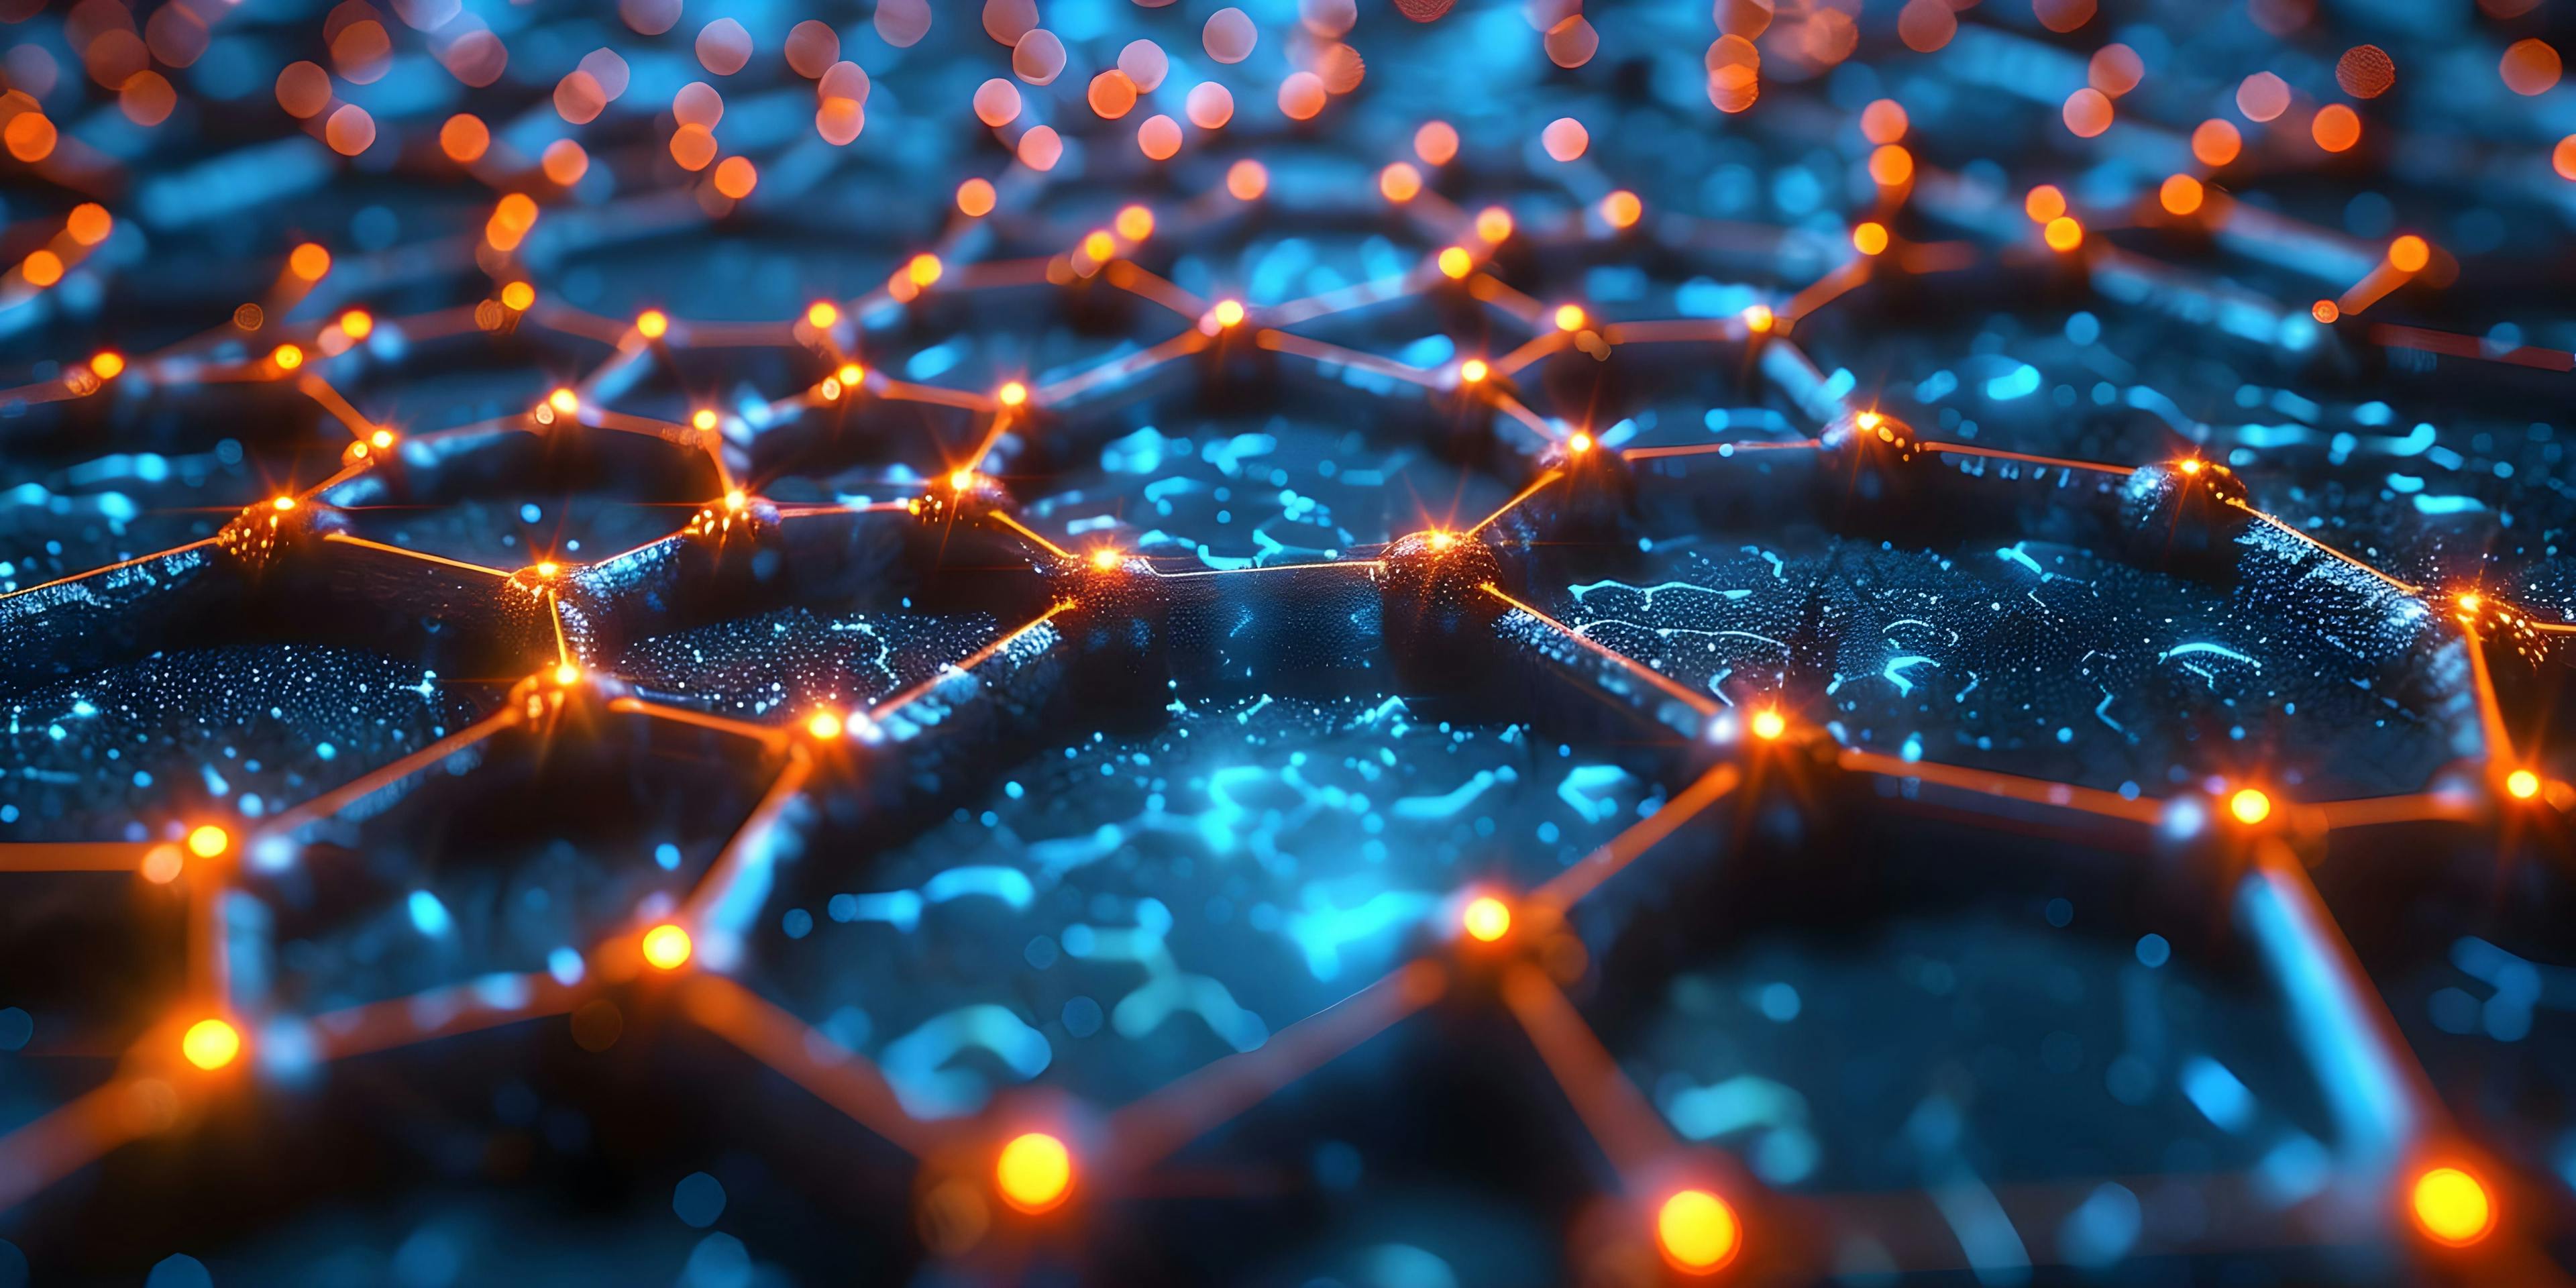 Visual representation of advanced carbon nanomaterial structures such as nanotubes and graphene in a D rendering. Nanoscale chemical imaging | Image Credit: © Ян Заболотний - stock.adobe.com